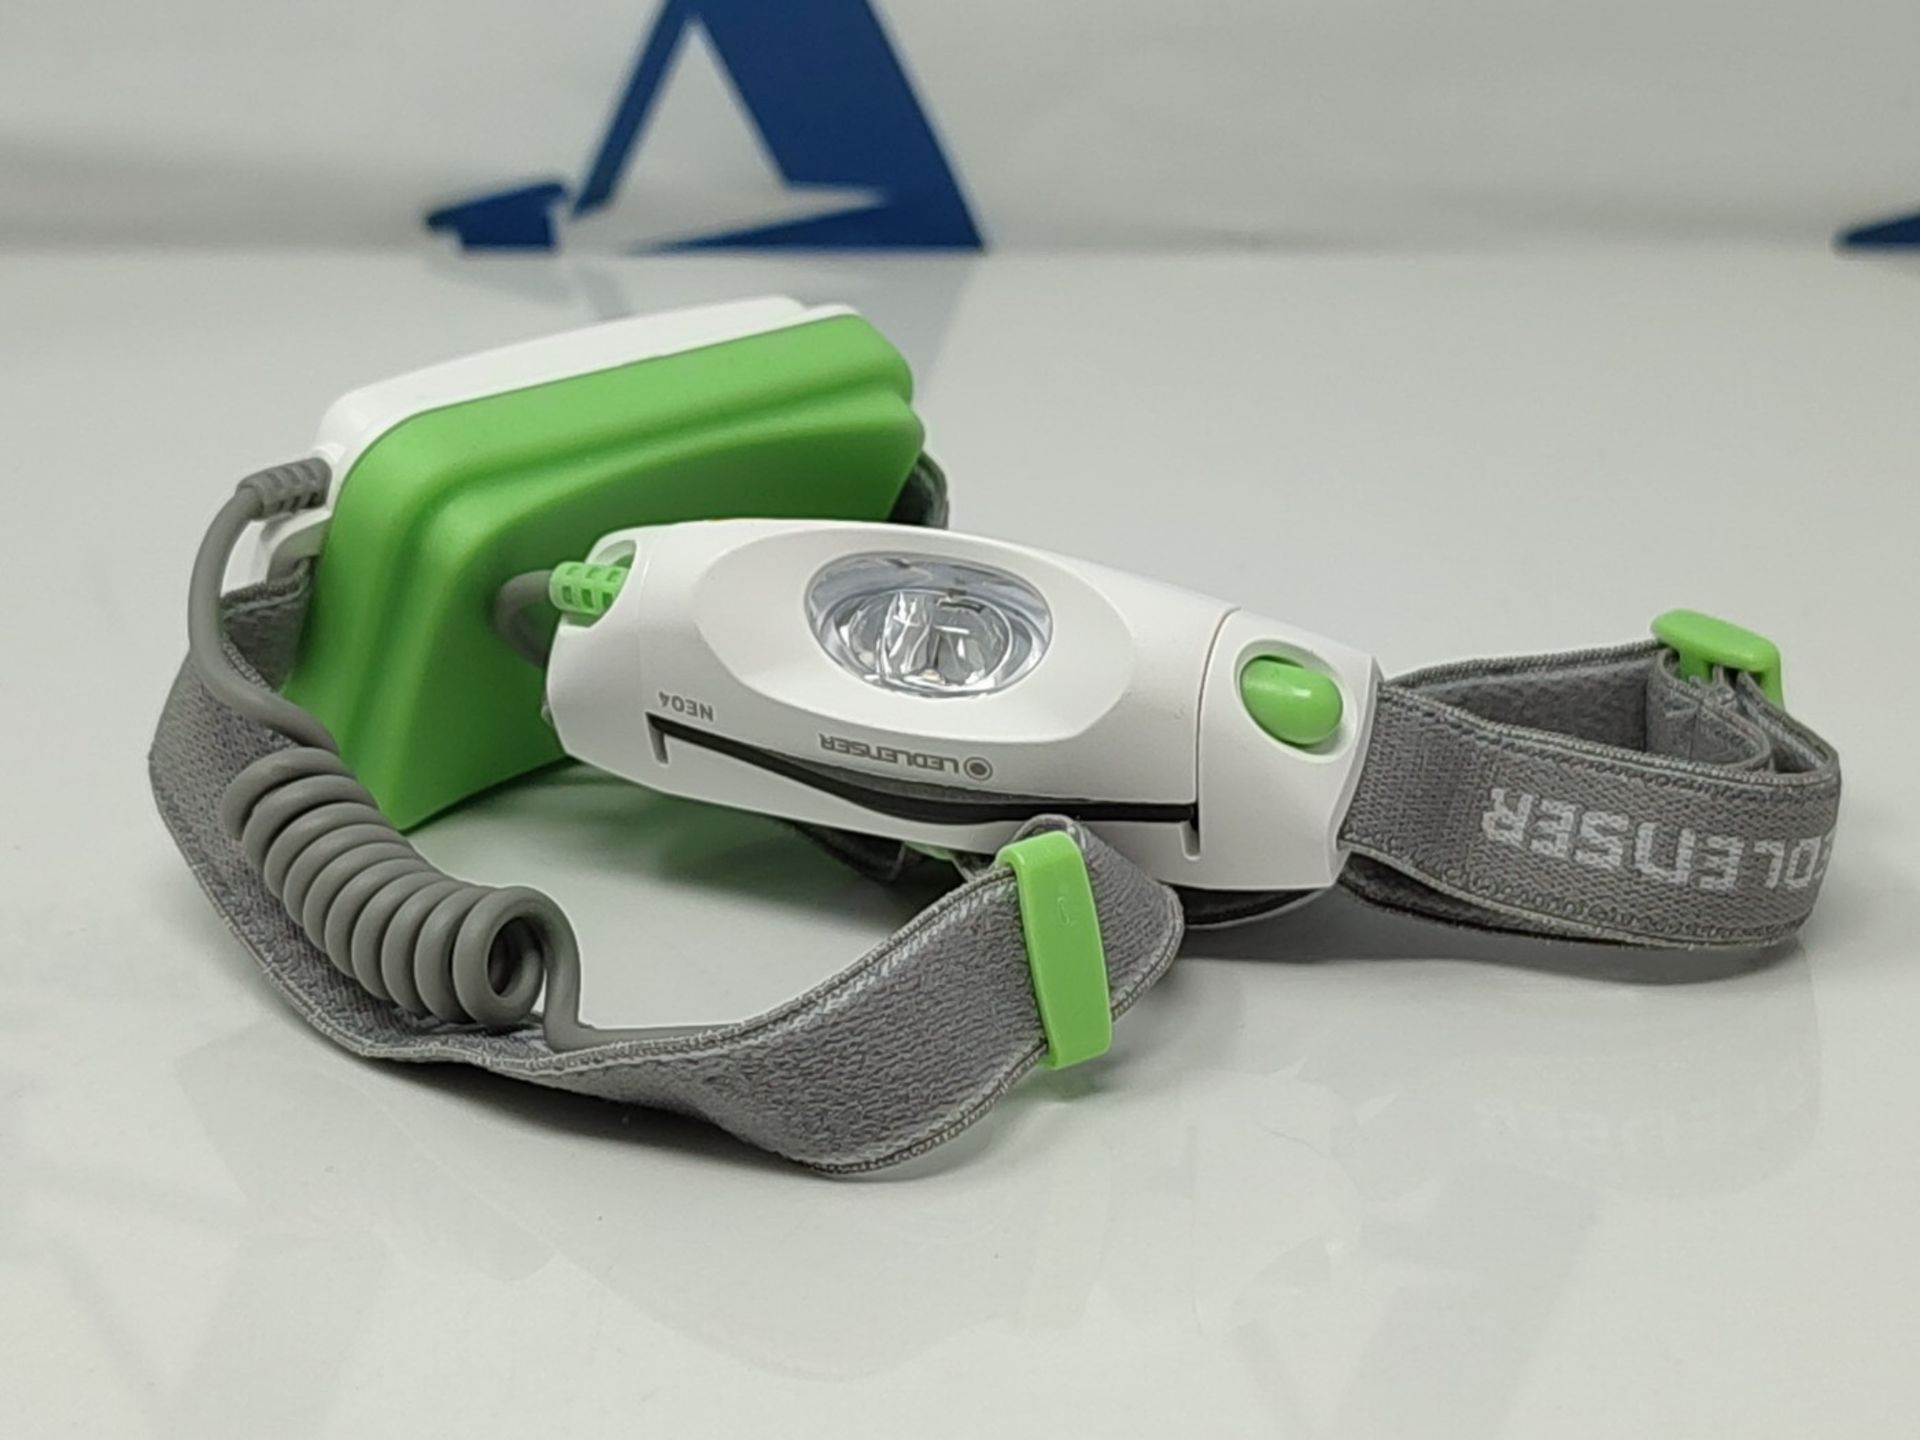 Ledlenser NEO4 Green Battery Operated LED Head Torch, Super Bright 240 Lumens Headlamp - Image 3 of 3